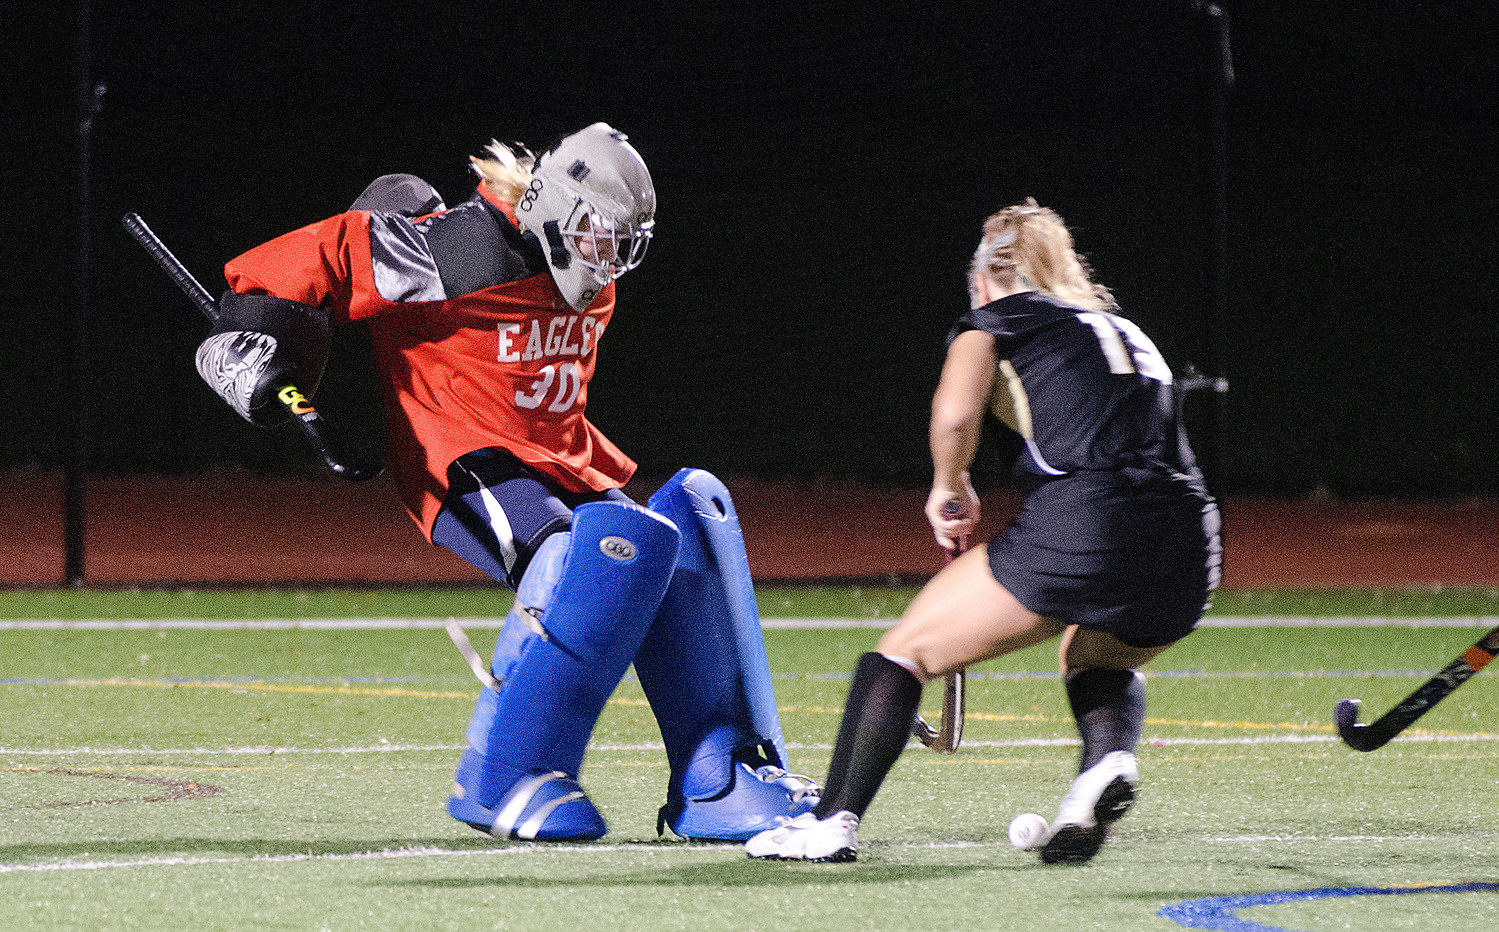 Junior goalkeeper Caileigh Durkin makes the initial save on Skippers midfielder in overtime, attempting to boot the ball away from her.